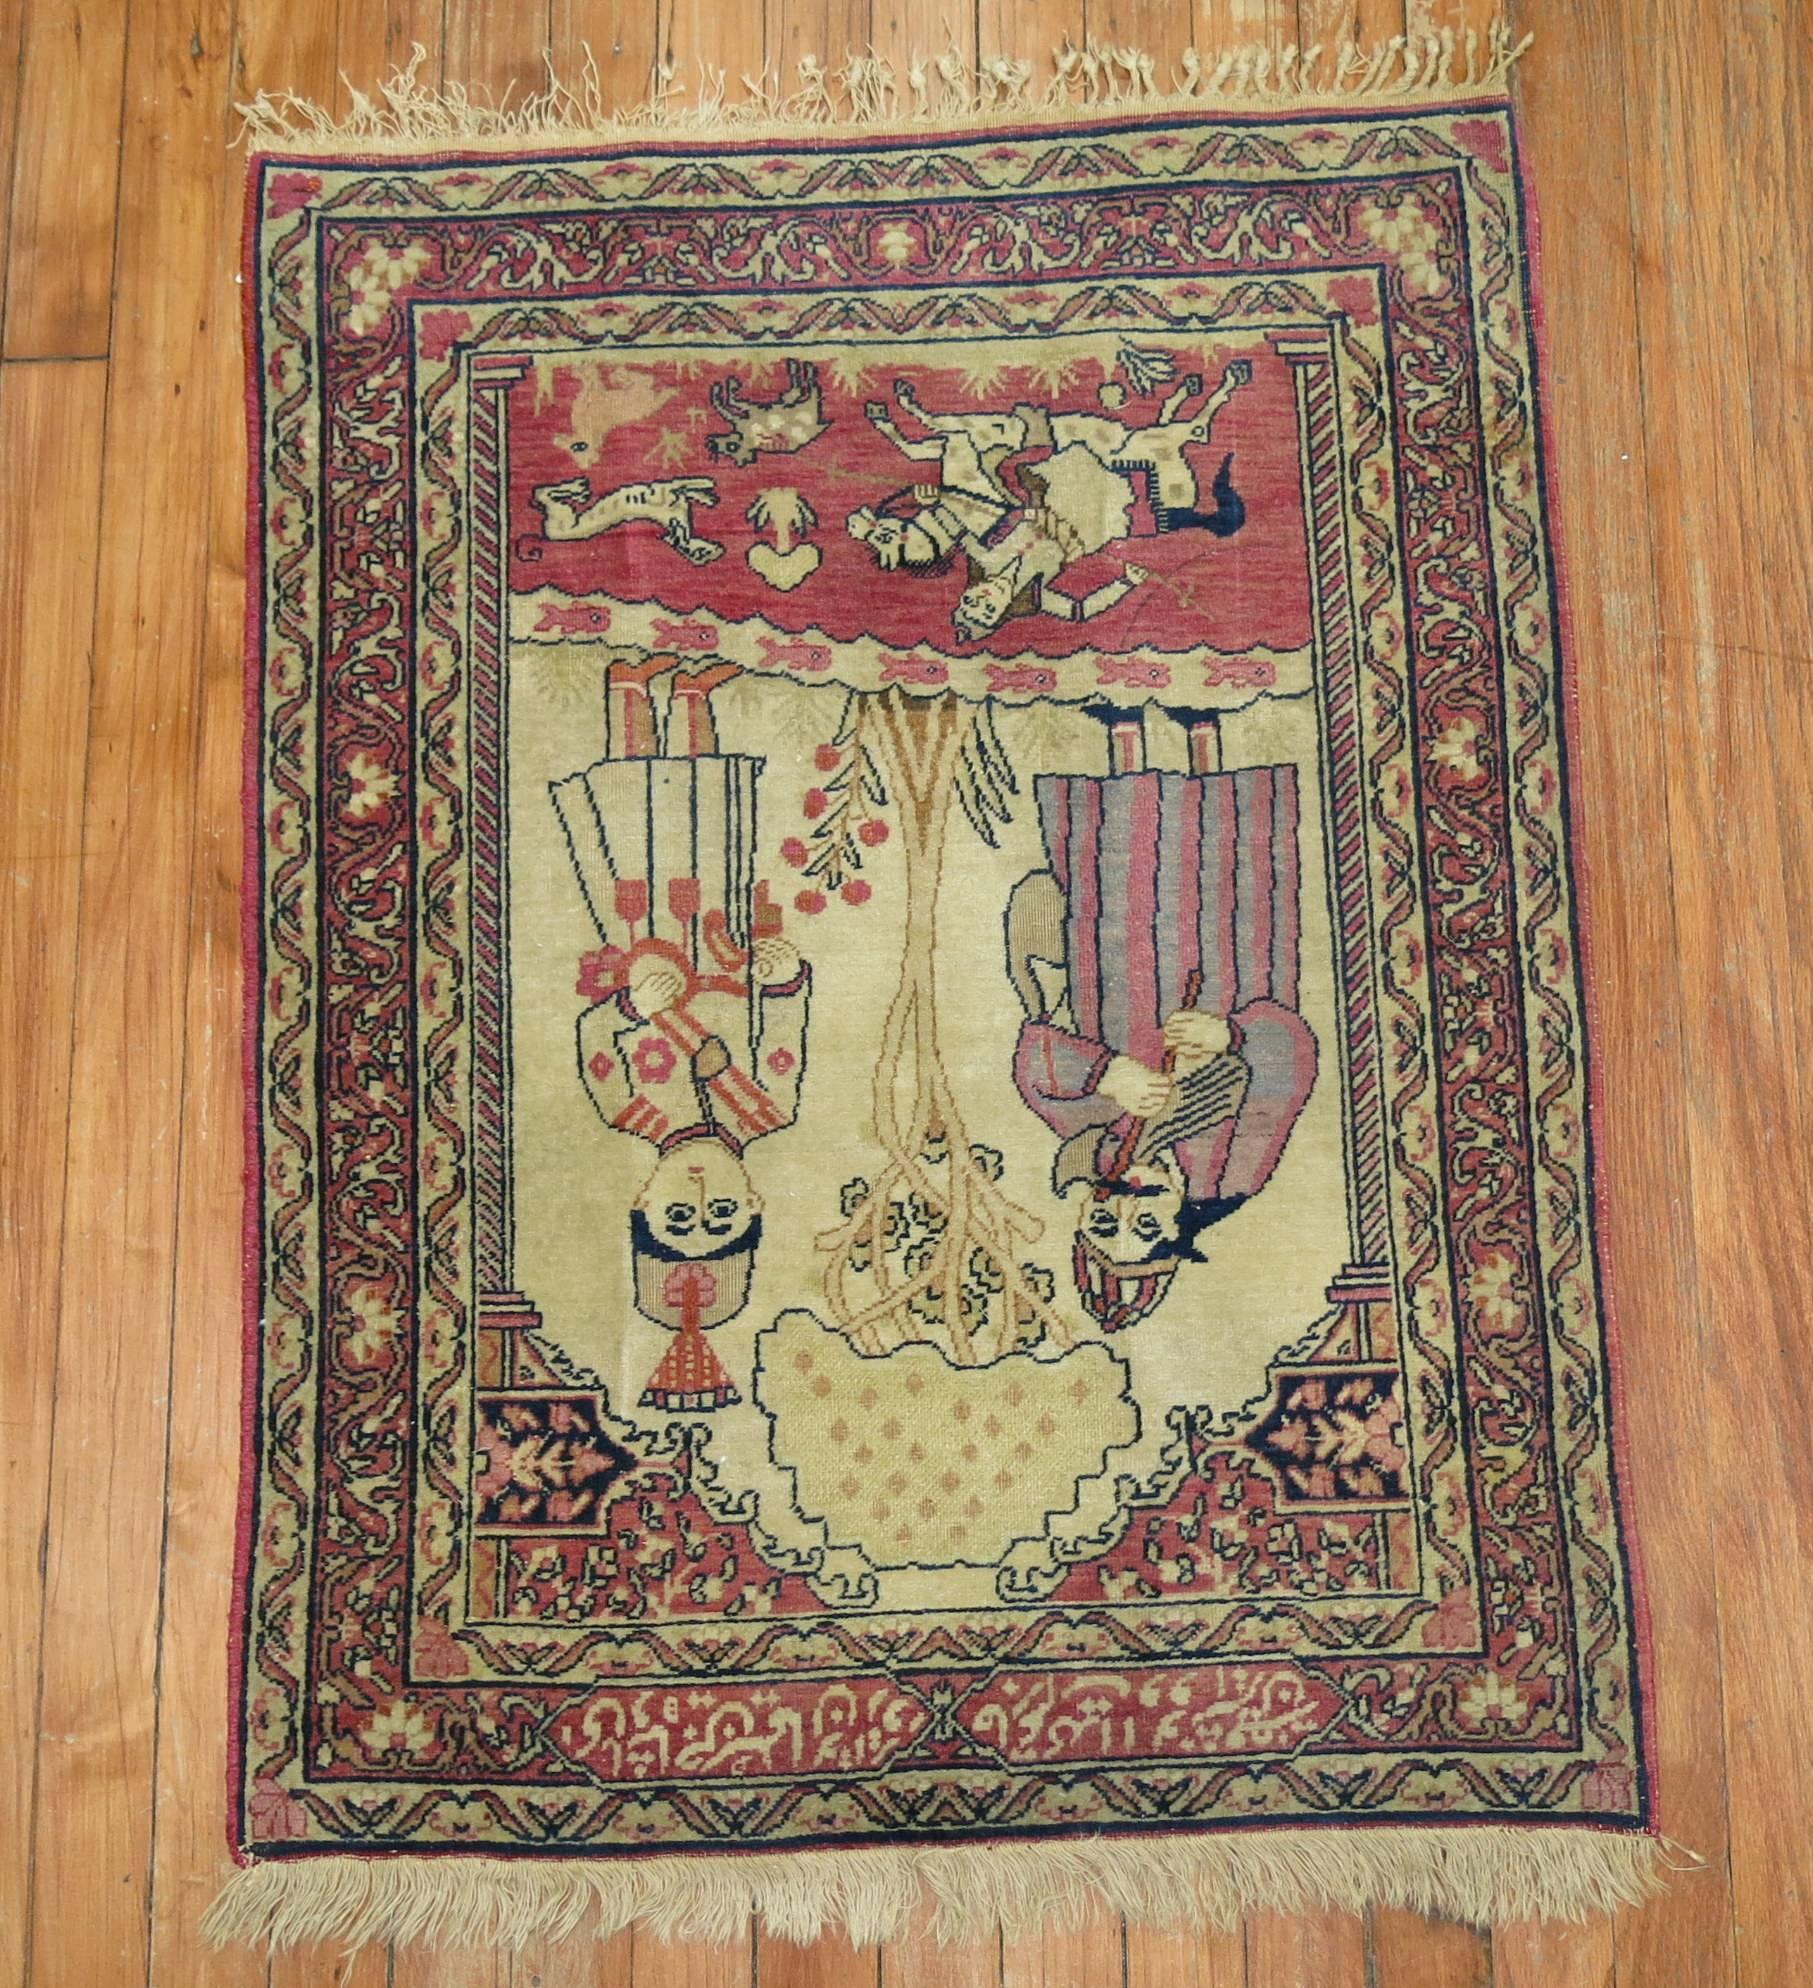 An early 20th century Lavar Kerman Pictorial rug originally given as a possible dowry gift. "Happy Persian New Year is in-scripted on 1 end".